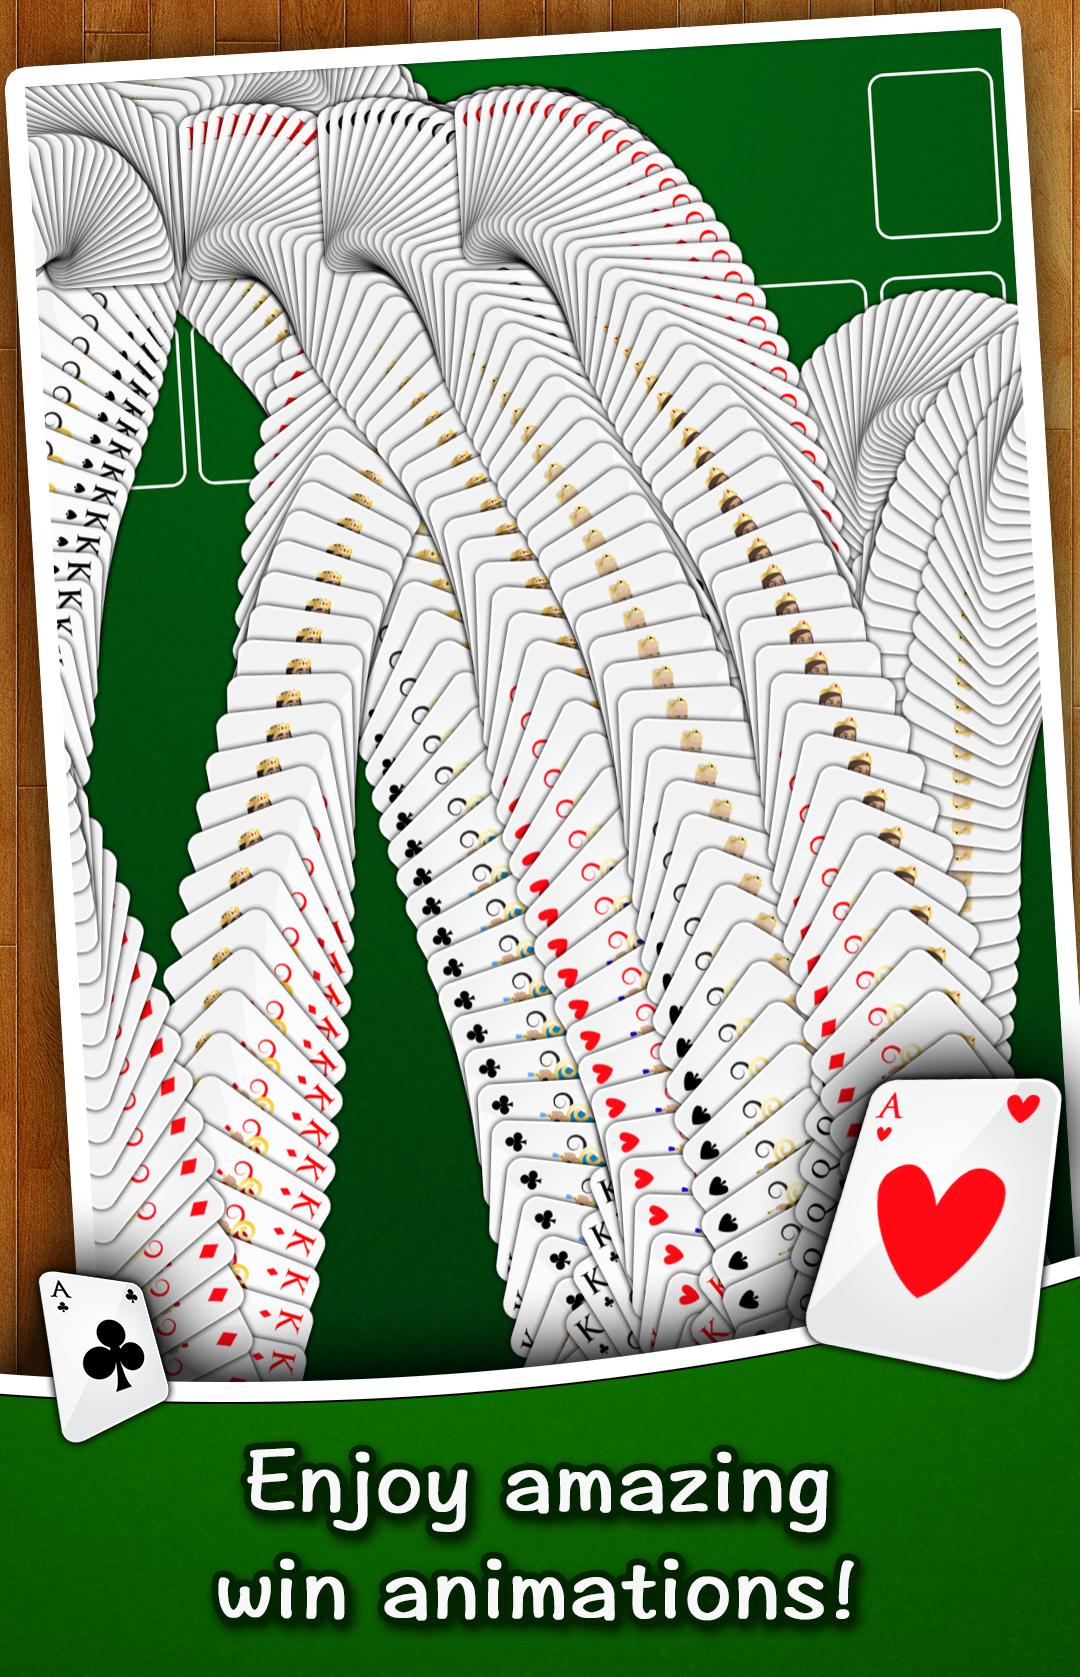 Solitaire FRVR for Android - APK Download